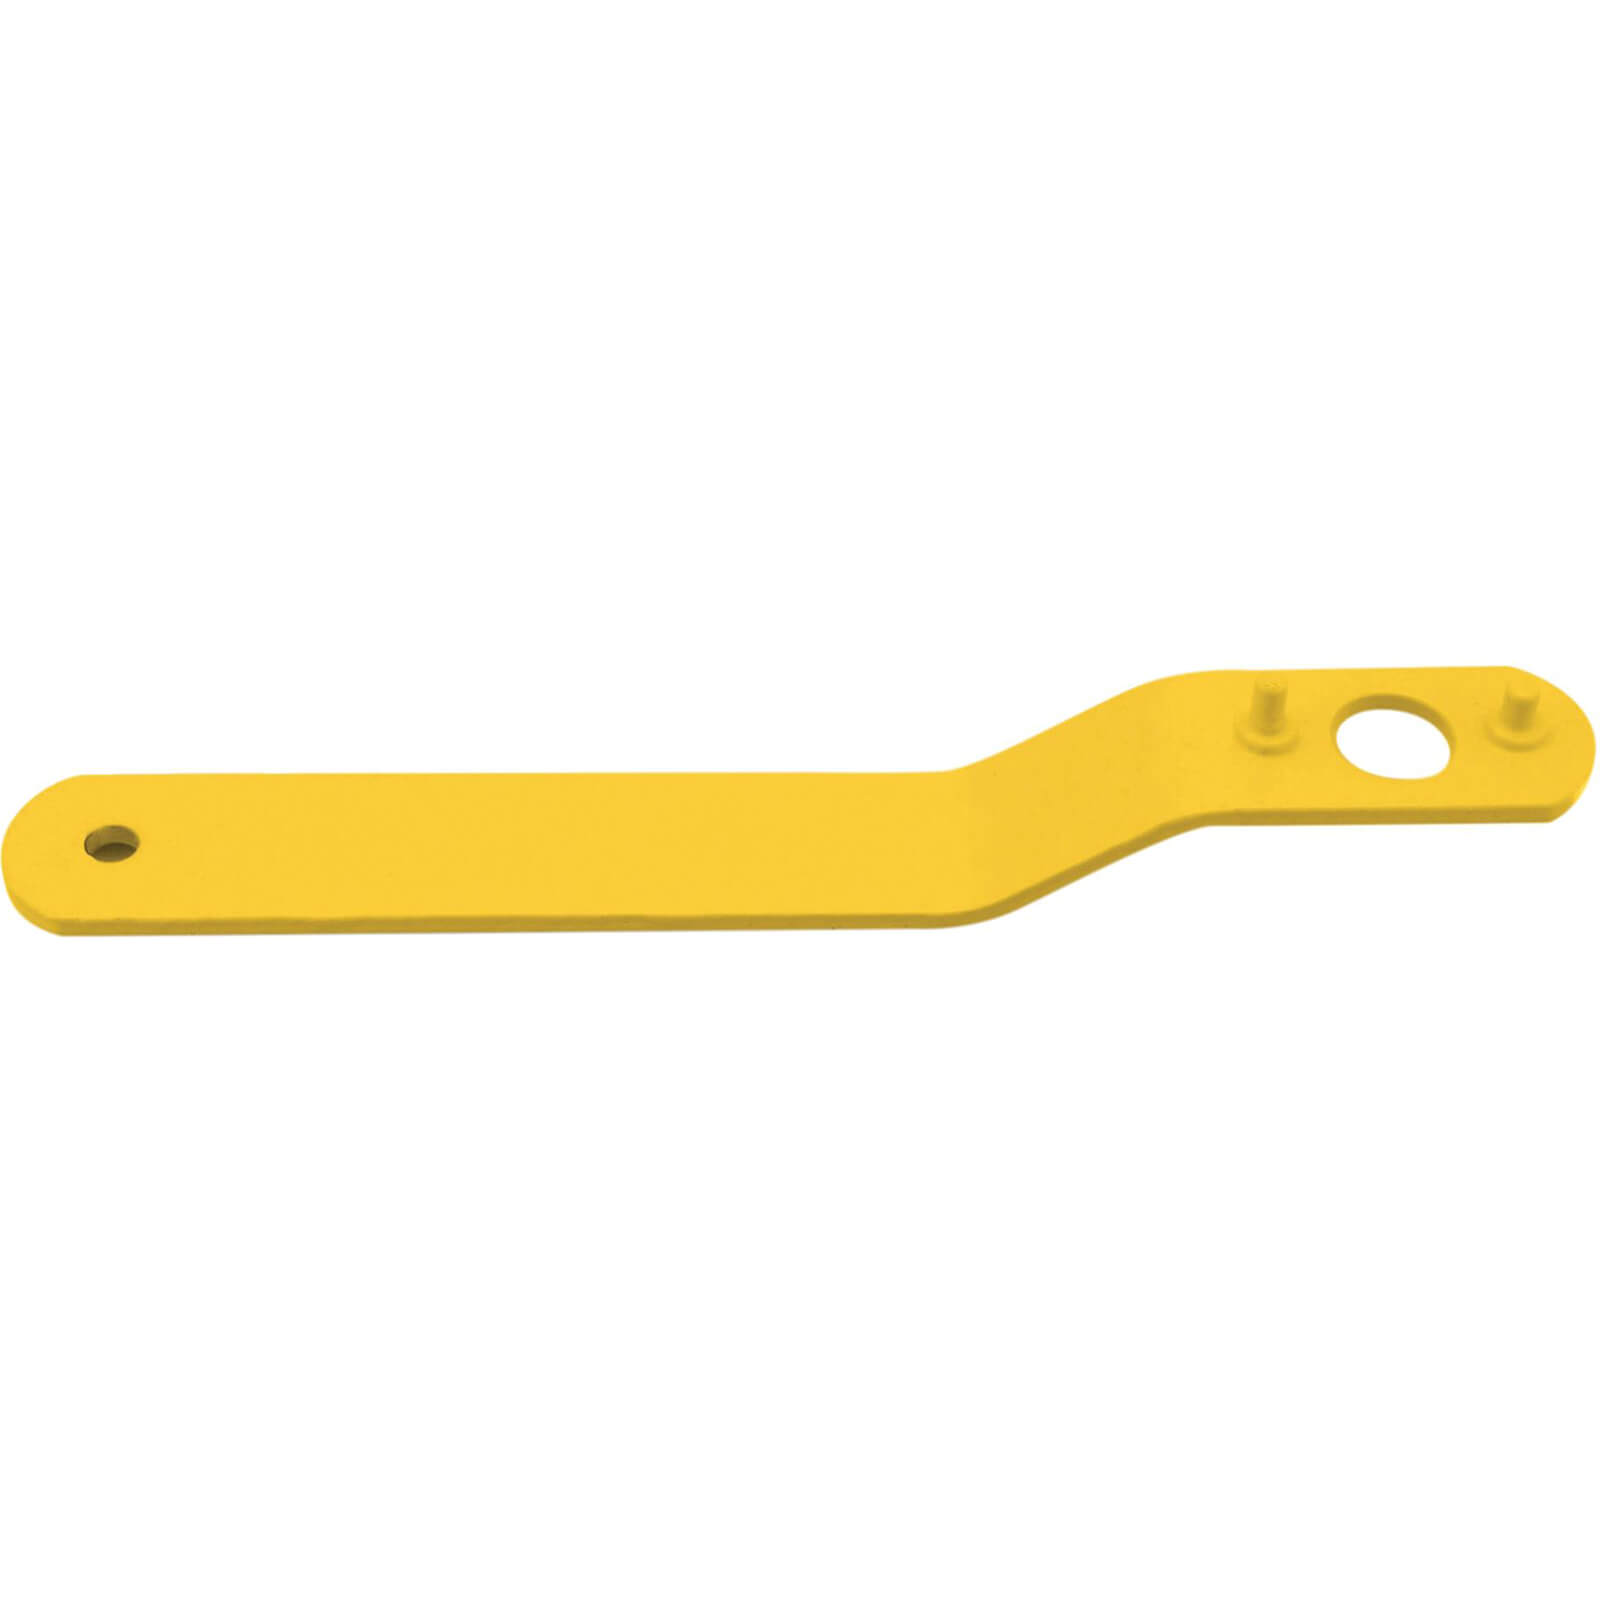 Image of Flexipads 28-4 Yellow Angle Grinder Pin Spanner